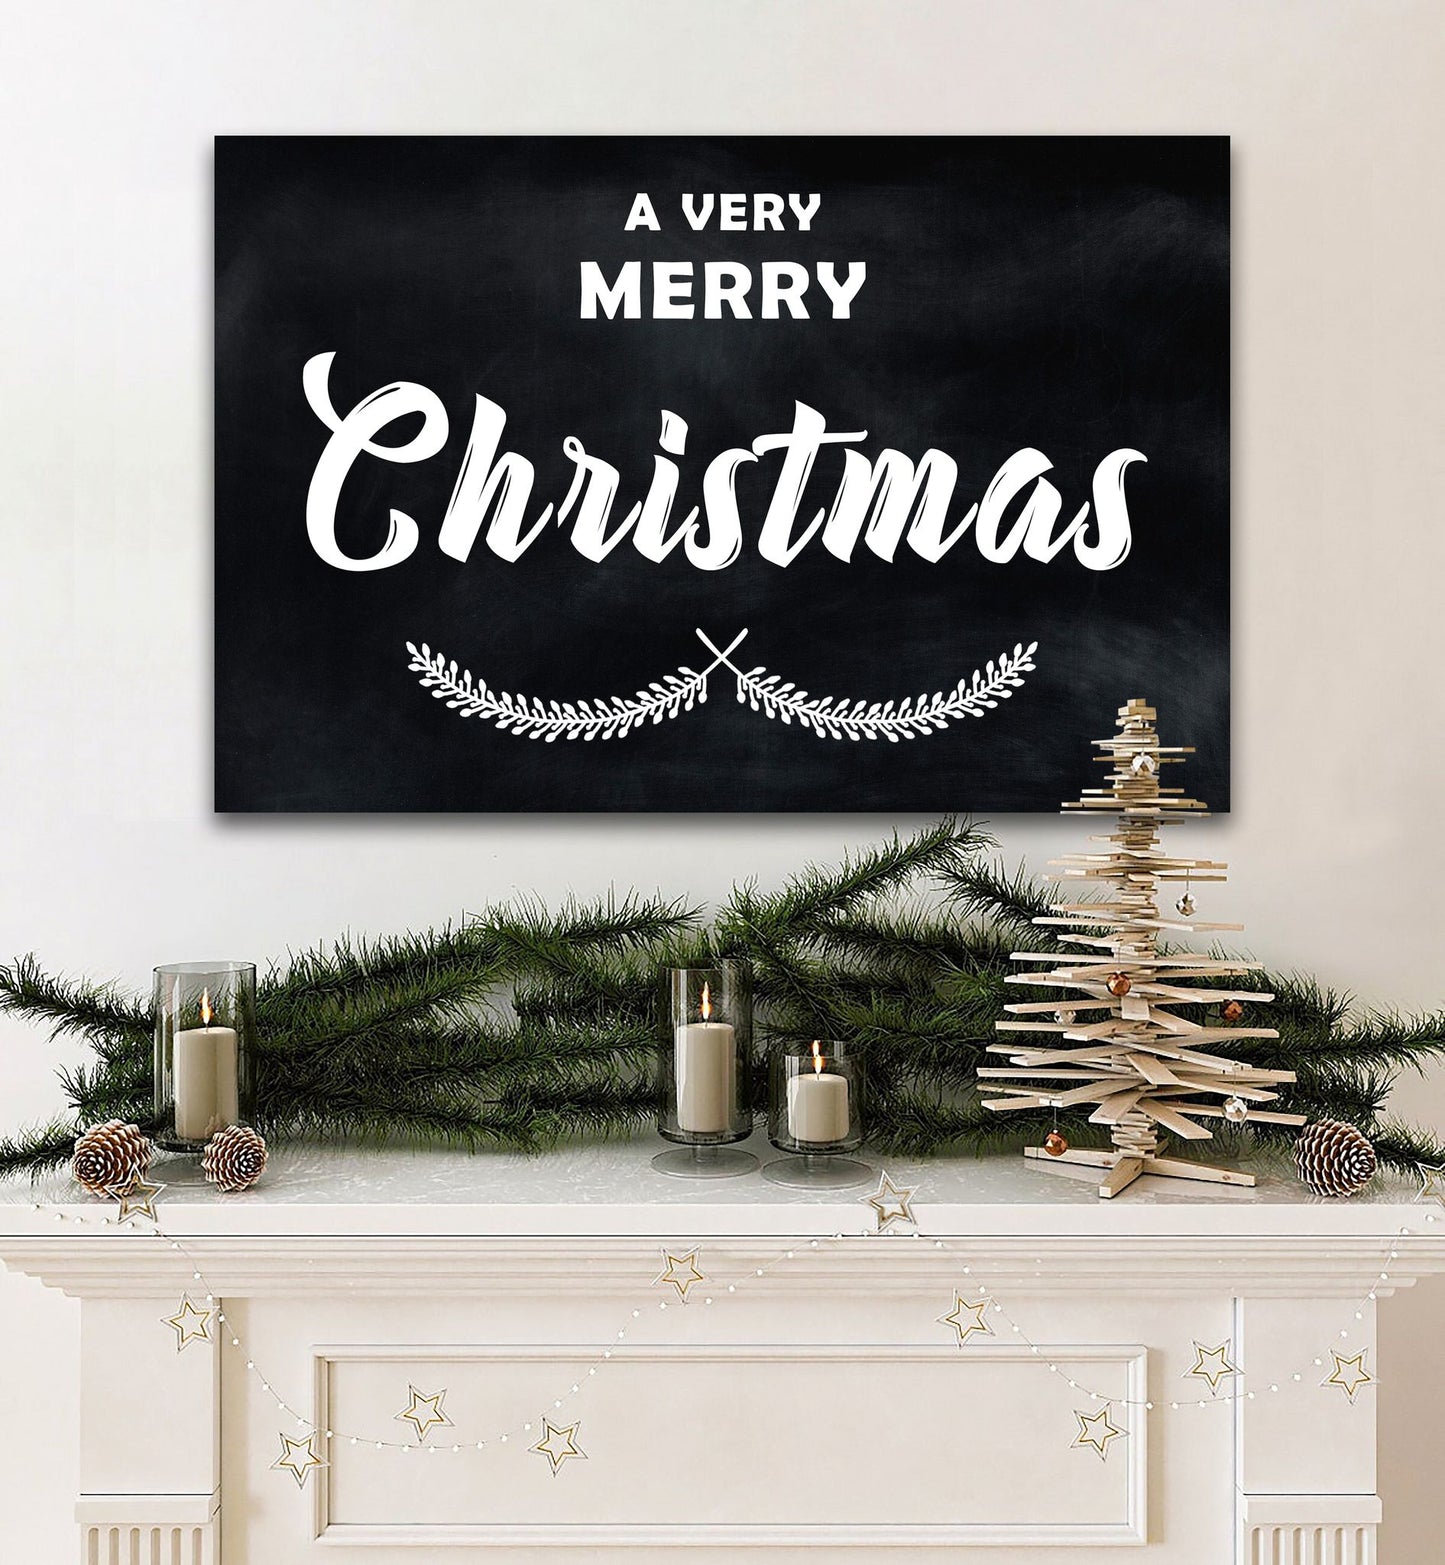 A Very Merry Christmas Canvas Wall Decor - AmourPrints